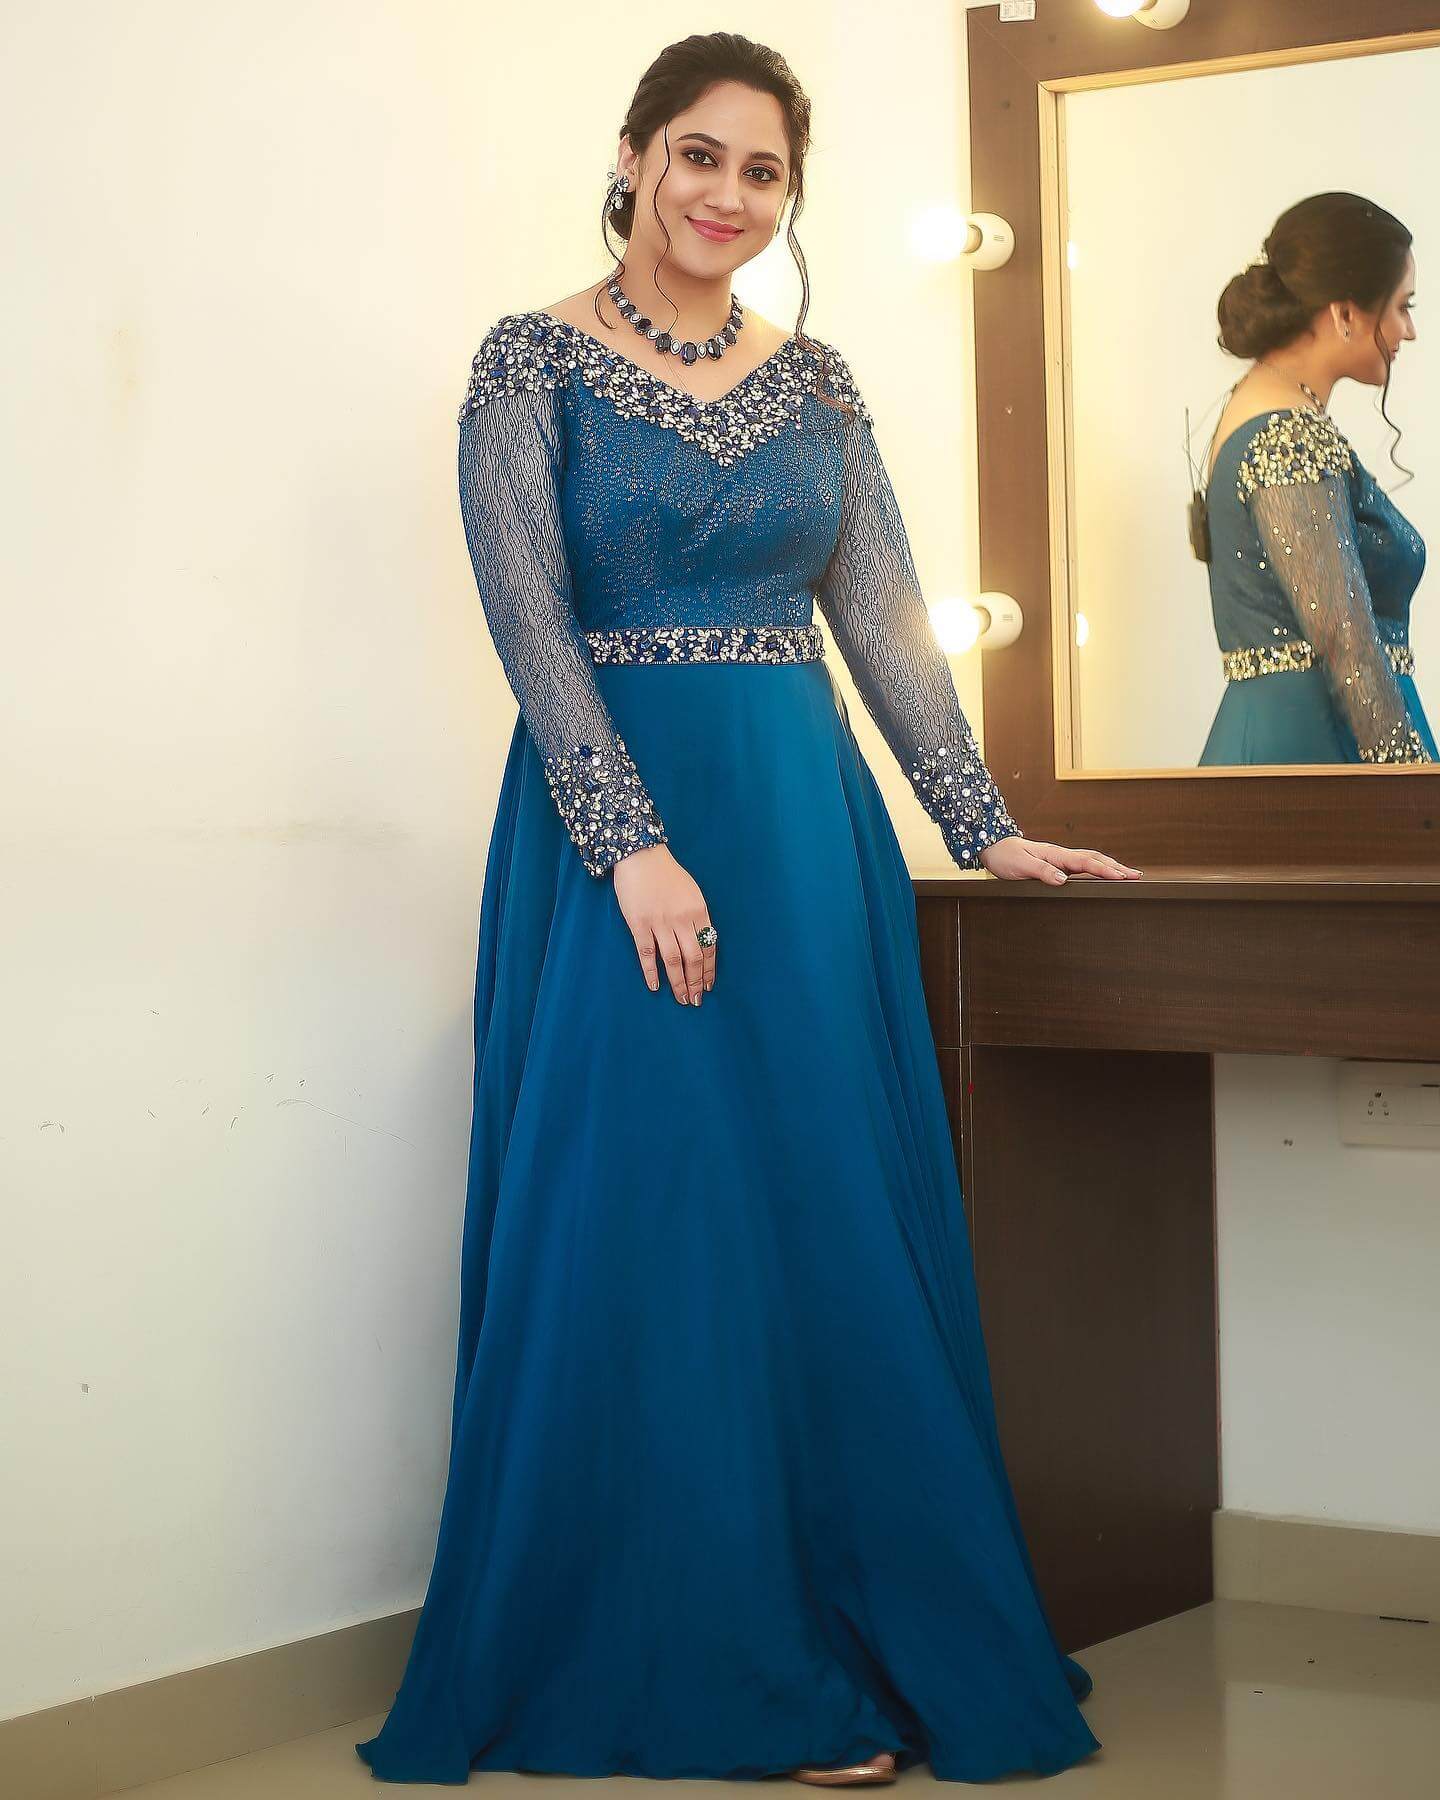 Miya George In Teal Blue Stone Embedded Full Sleeves Gown With Low Bun Hairstyle Traditional & Western Looks